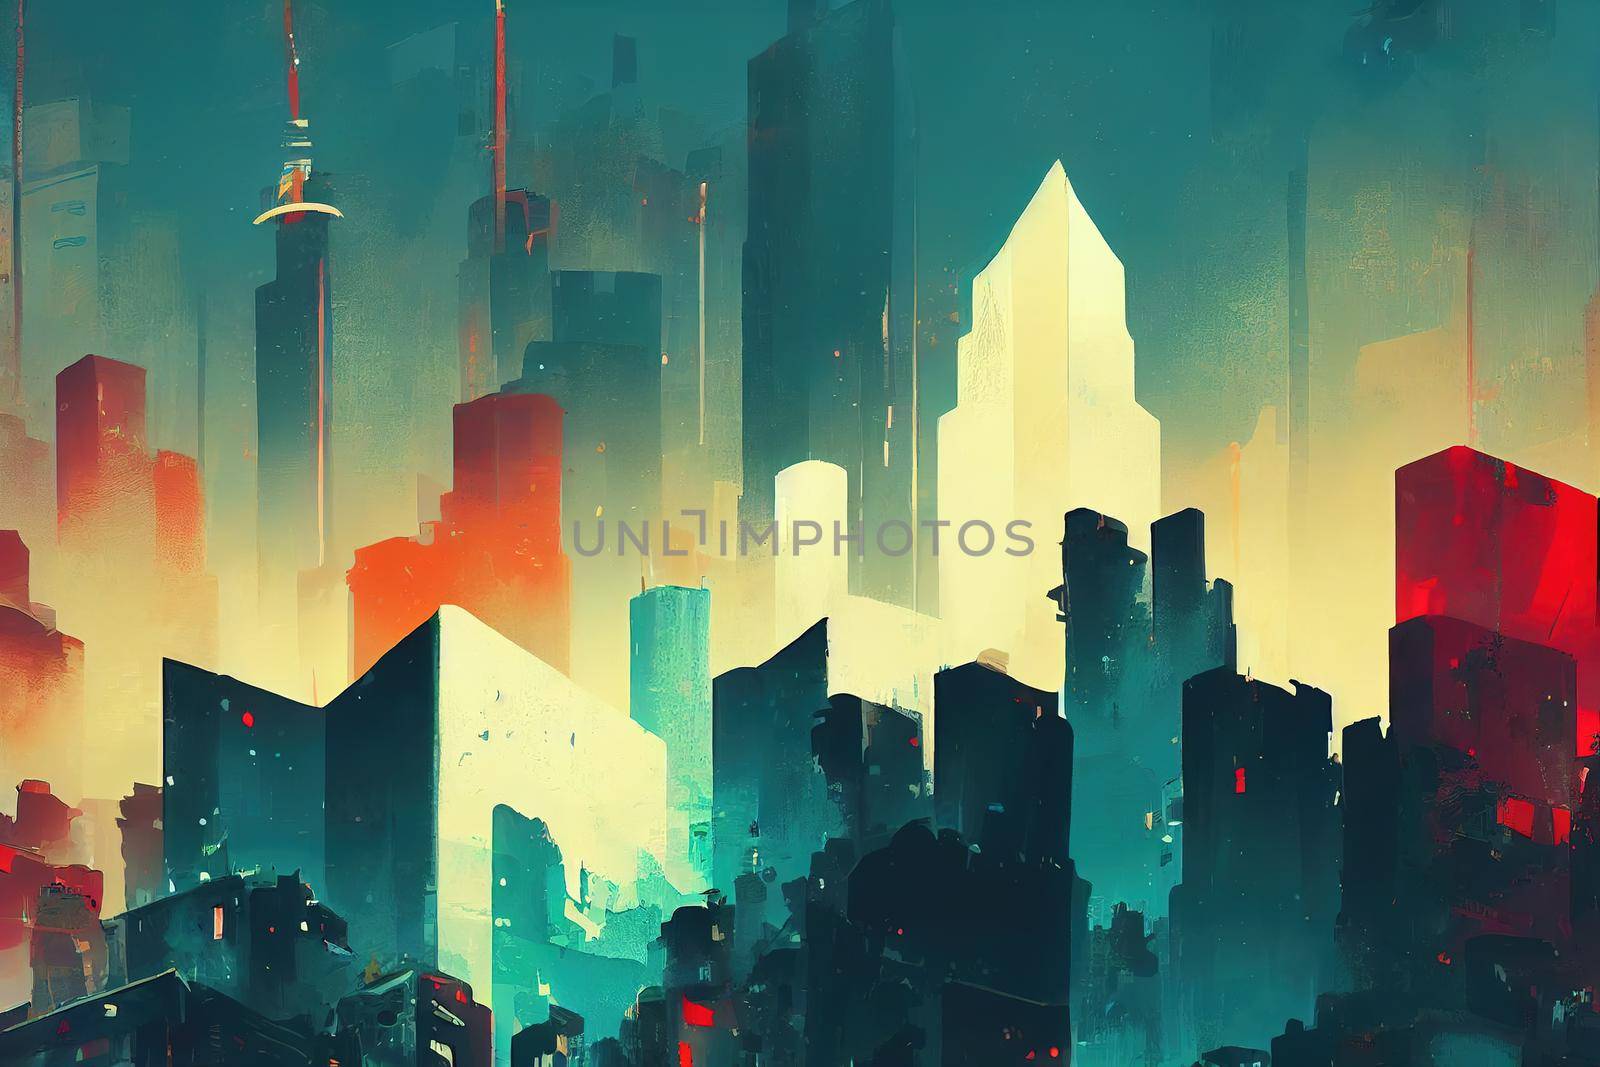 2d stylised painting like illustration of Jakarta abstract city by 2ragon